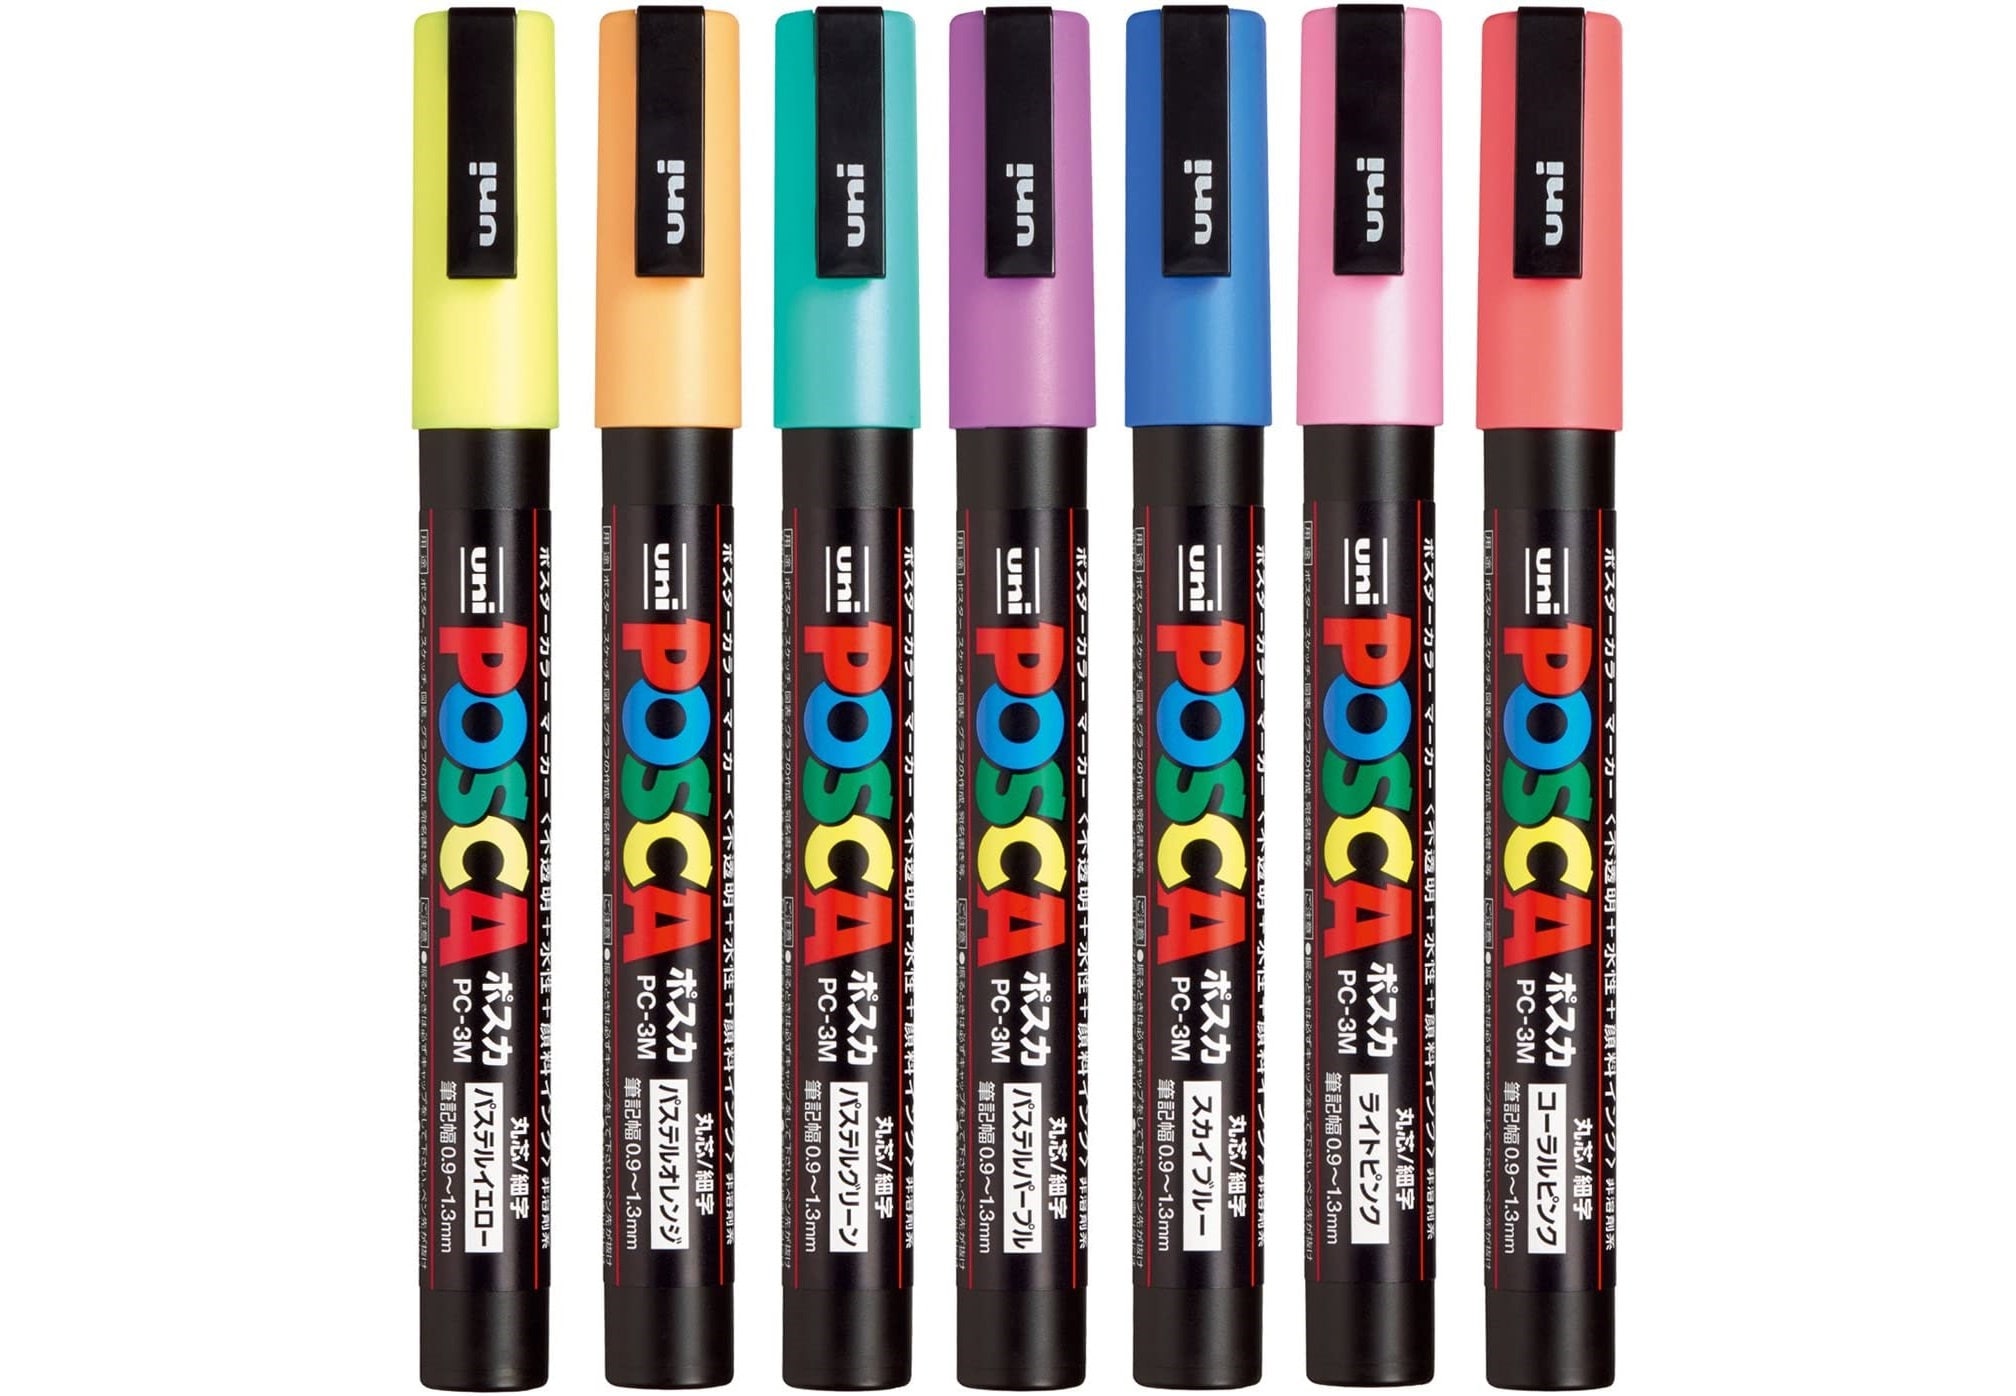 PC-1MR White Uni Posca Marker Paint Marker Permanent Pen Ultra Fine 0.7mm Nib Calibre Writes on Any Metal Surface with Plastic Frame Made of Fabric